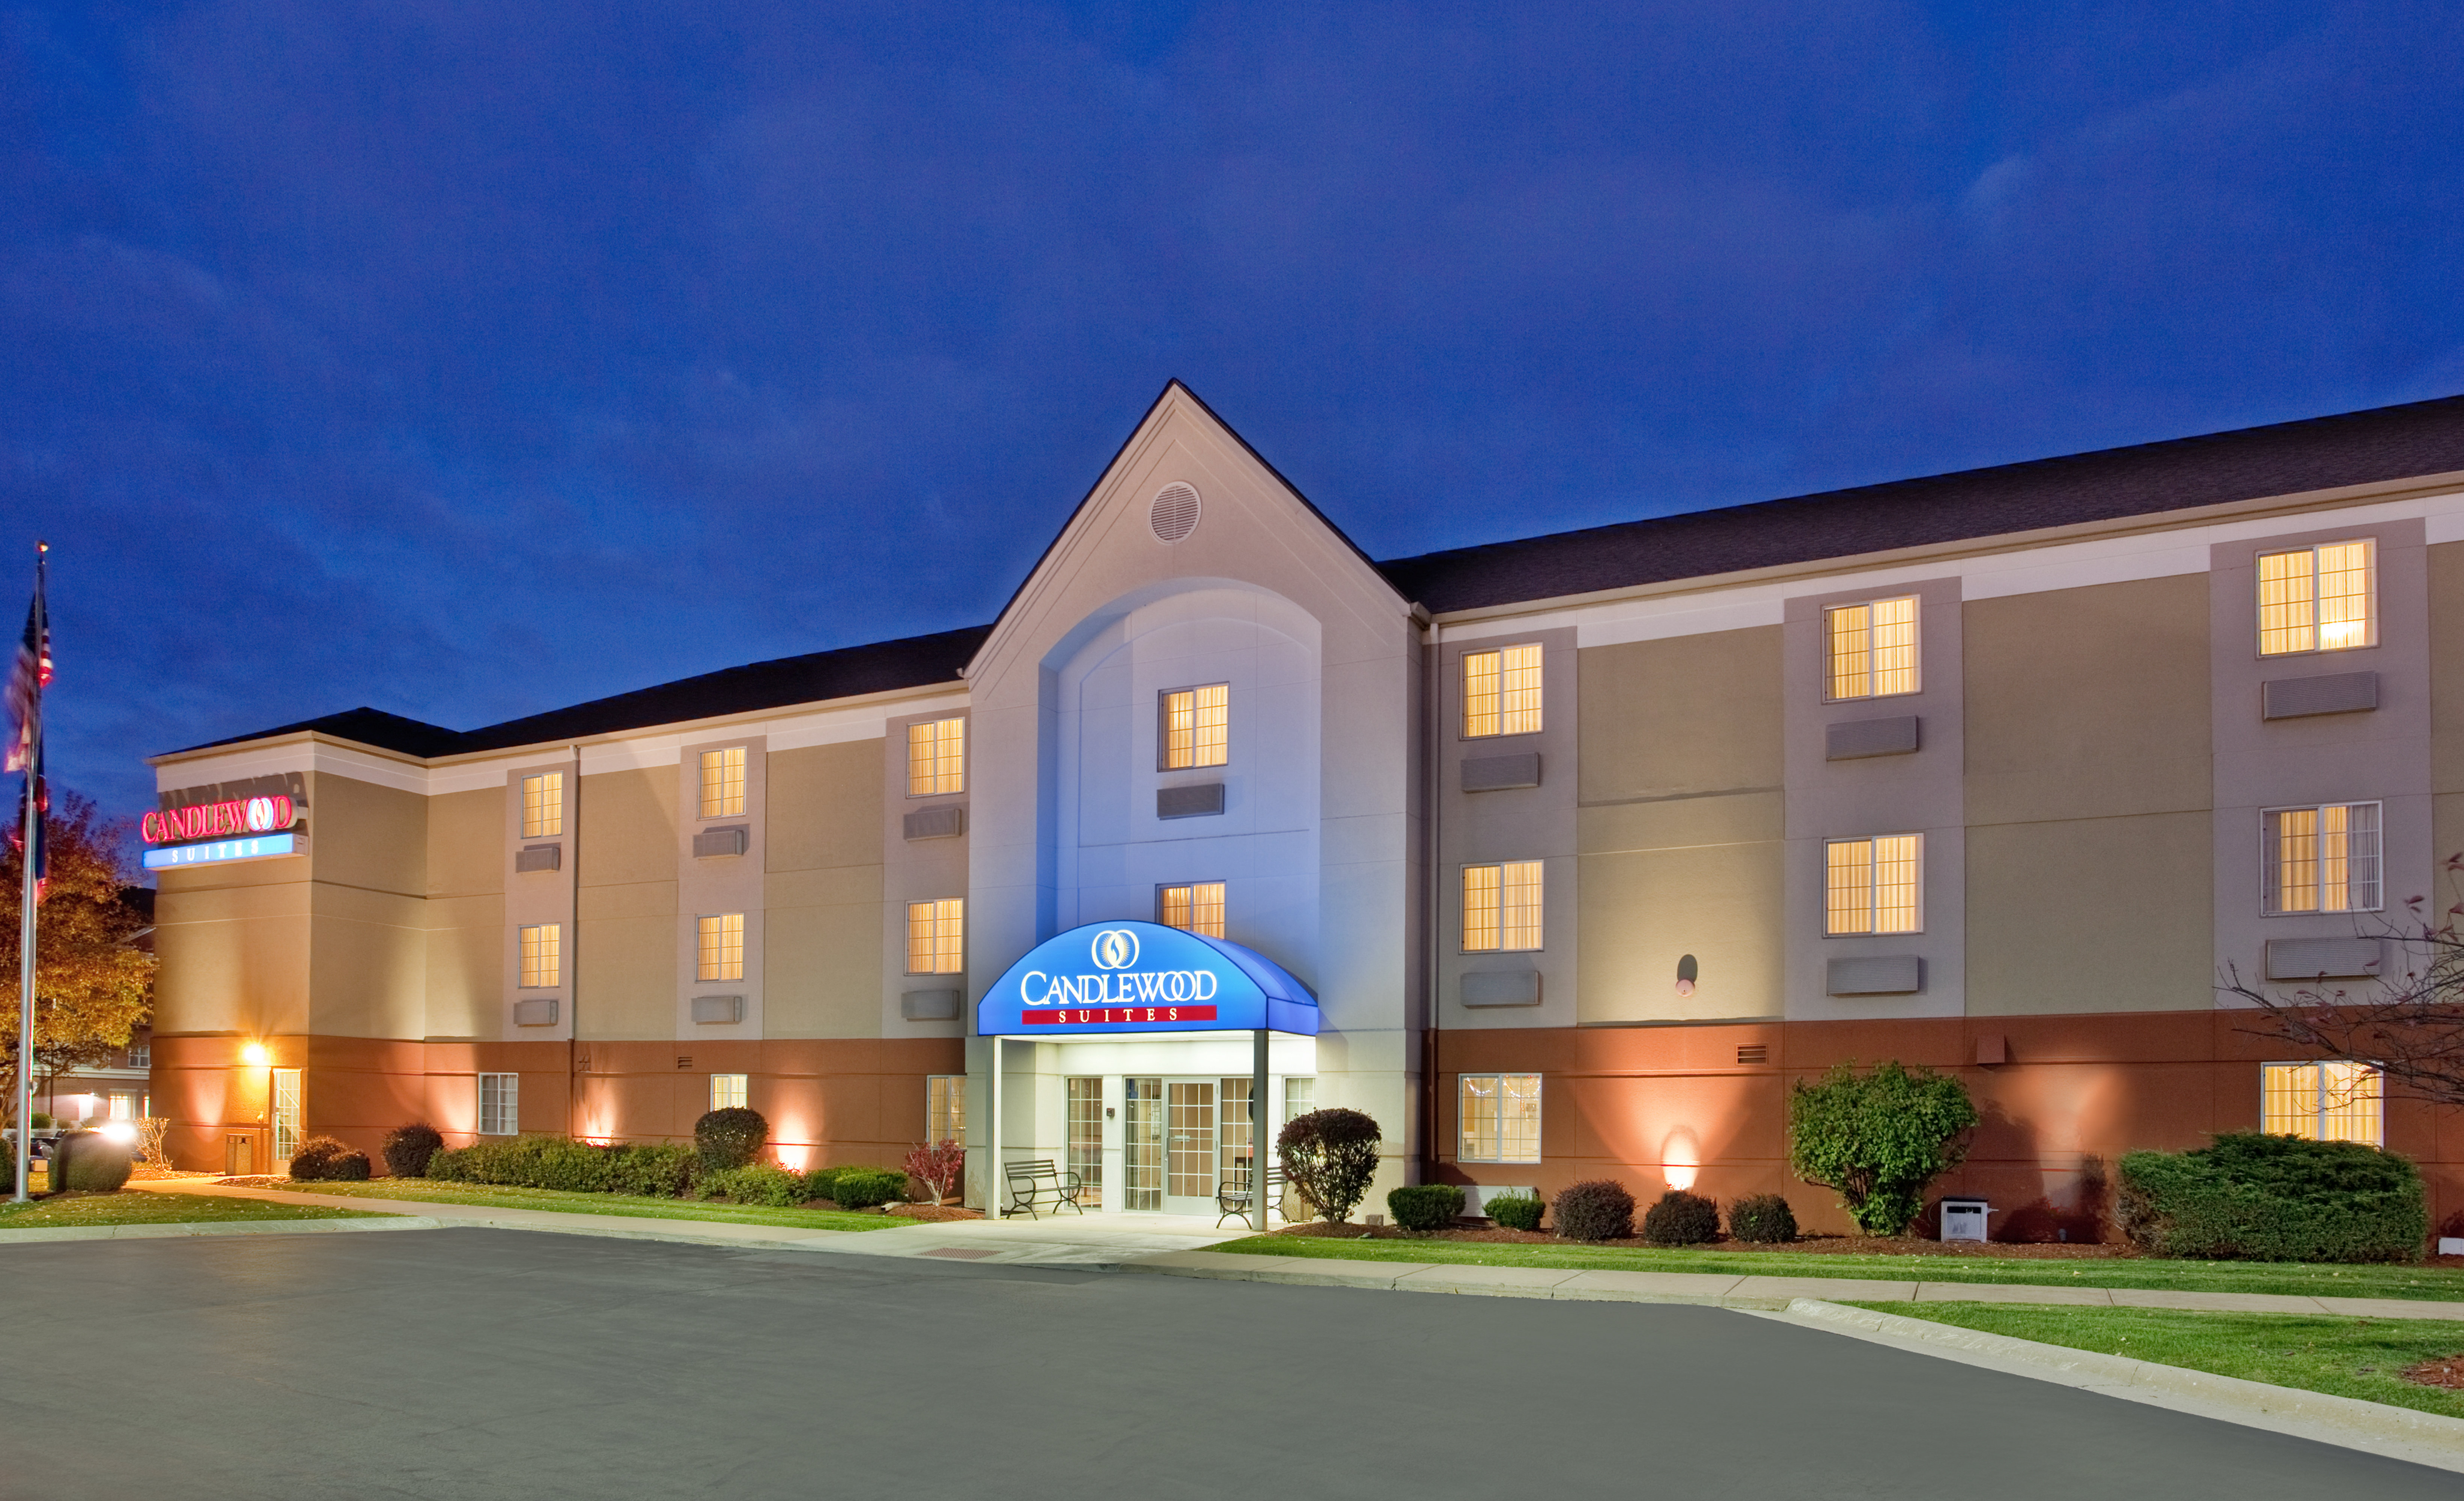 Welcome to Candlewood Suites Rockford!